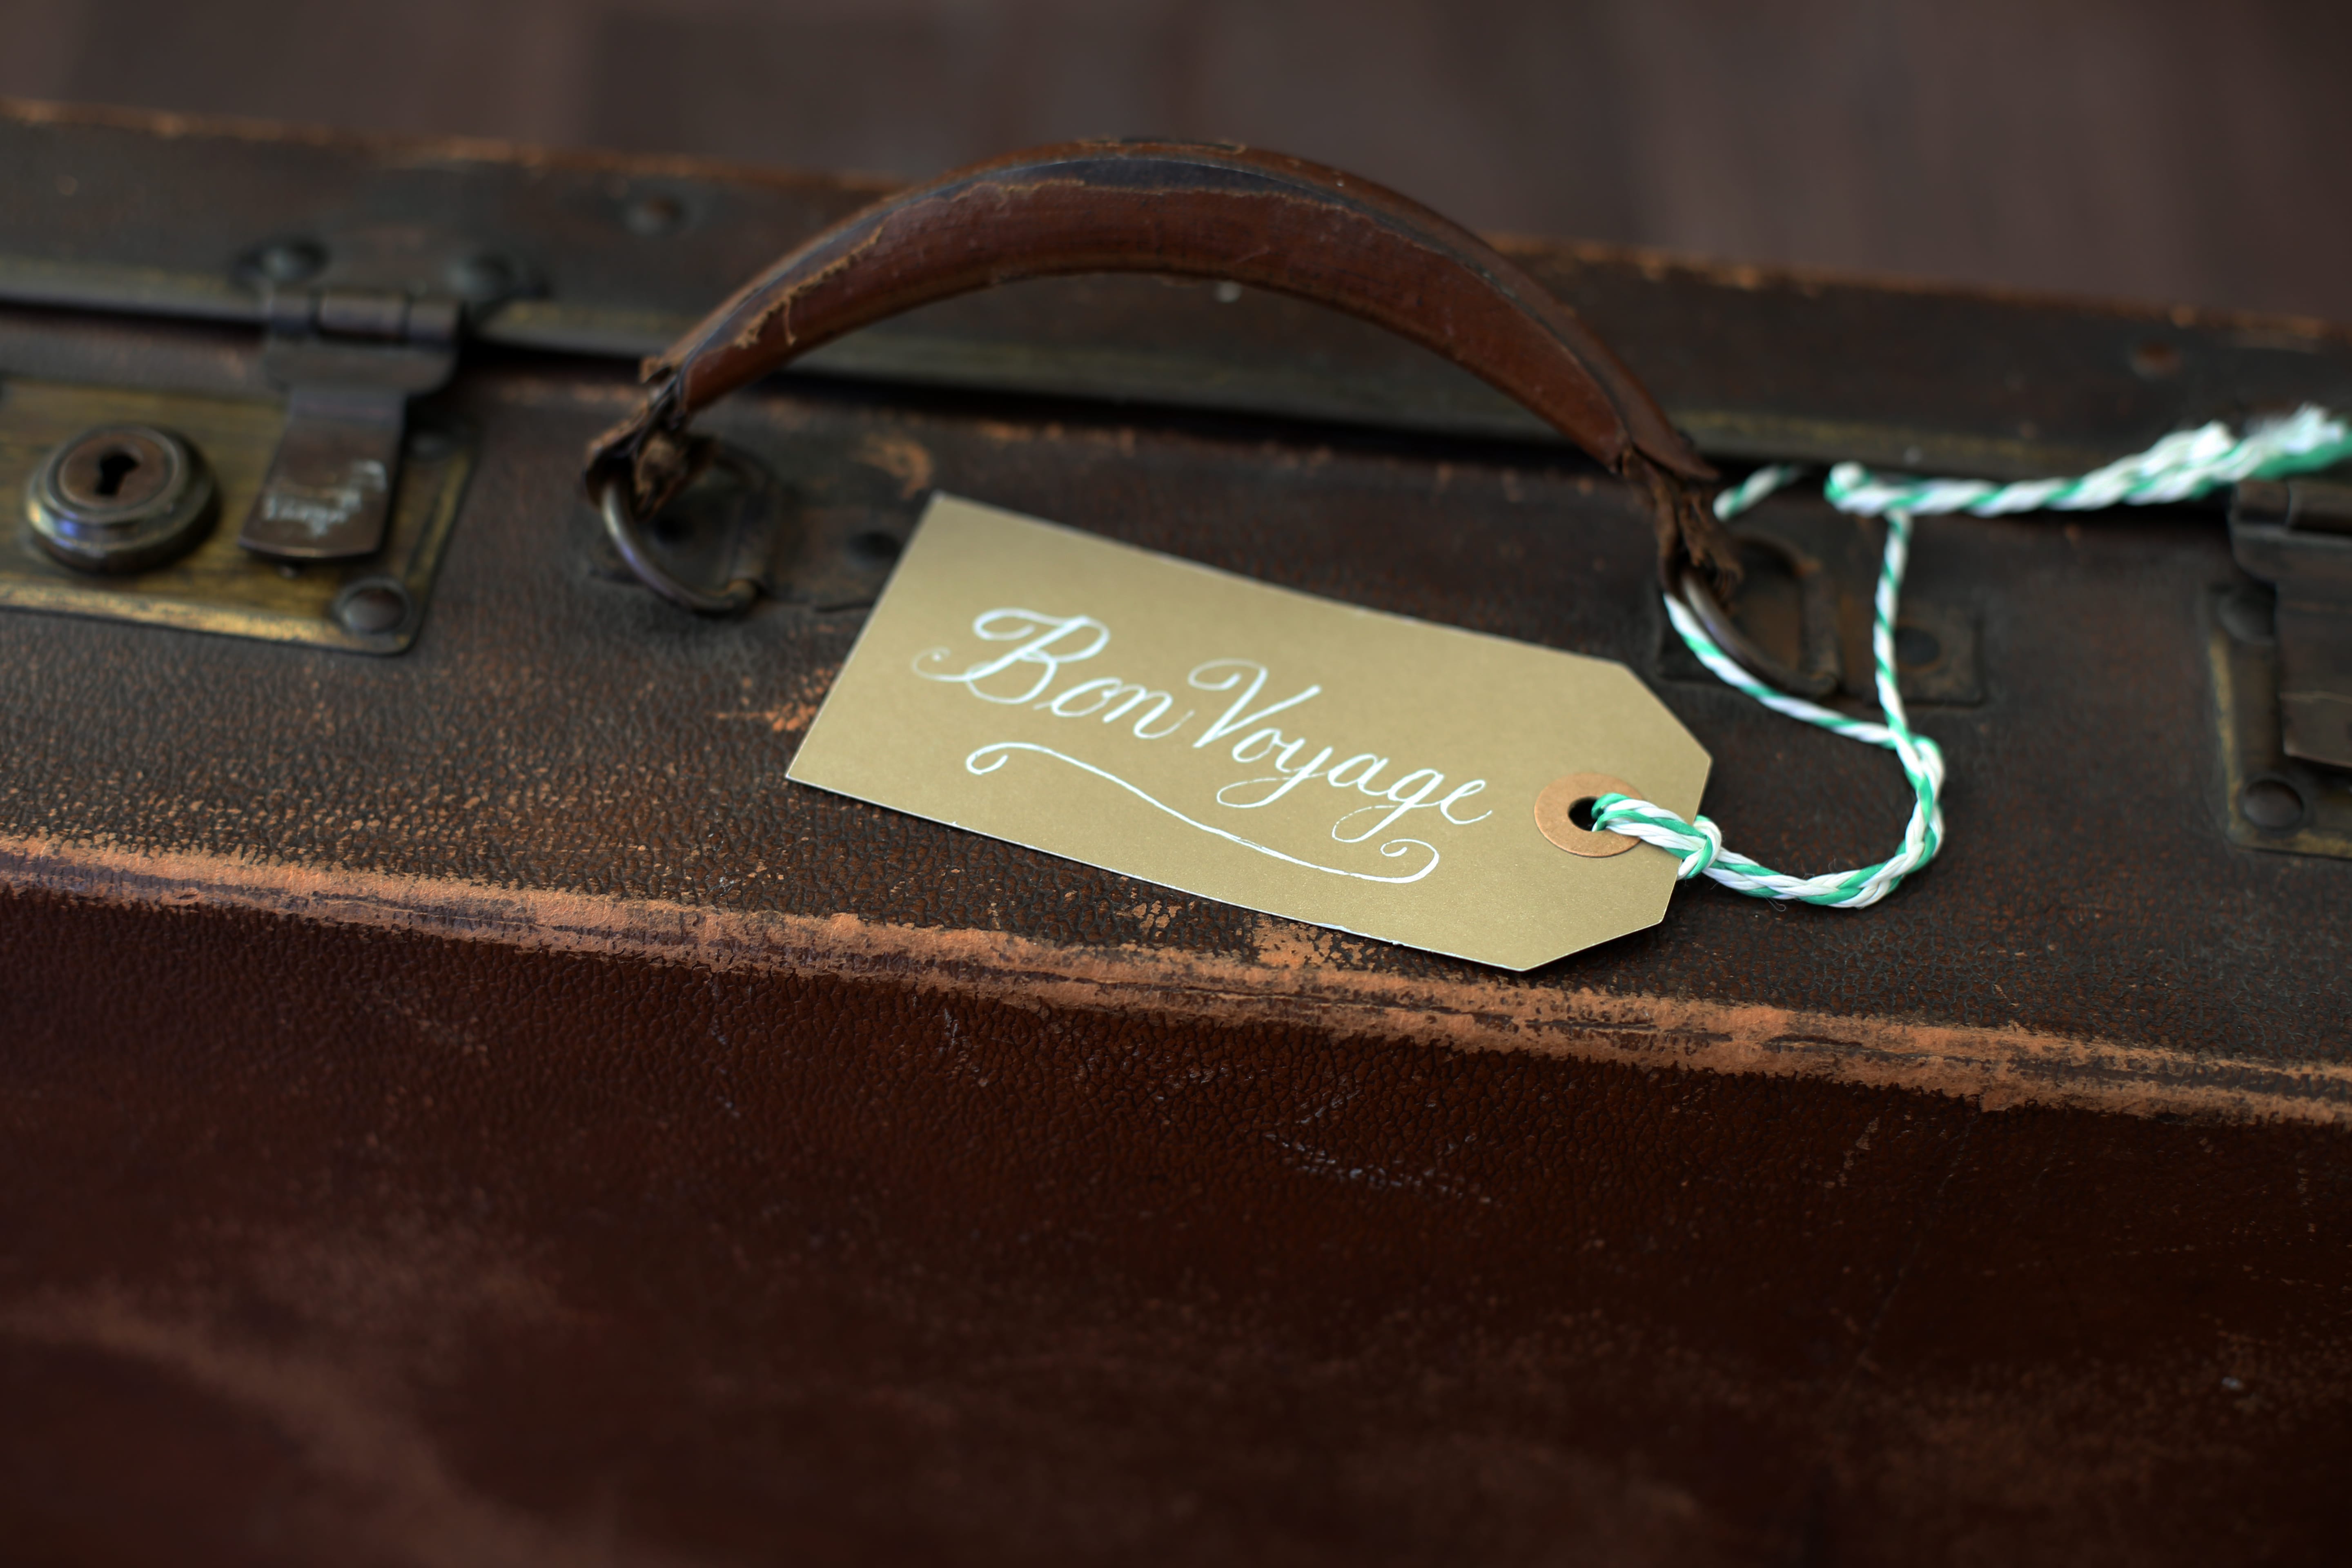 Bag with Bon Voyage Calligraphy Message Tag Attached